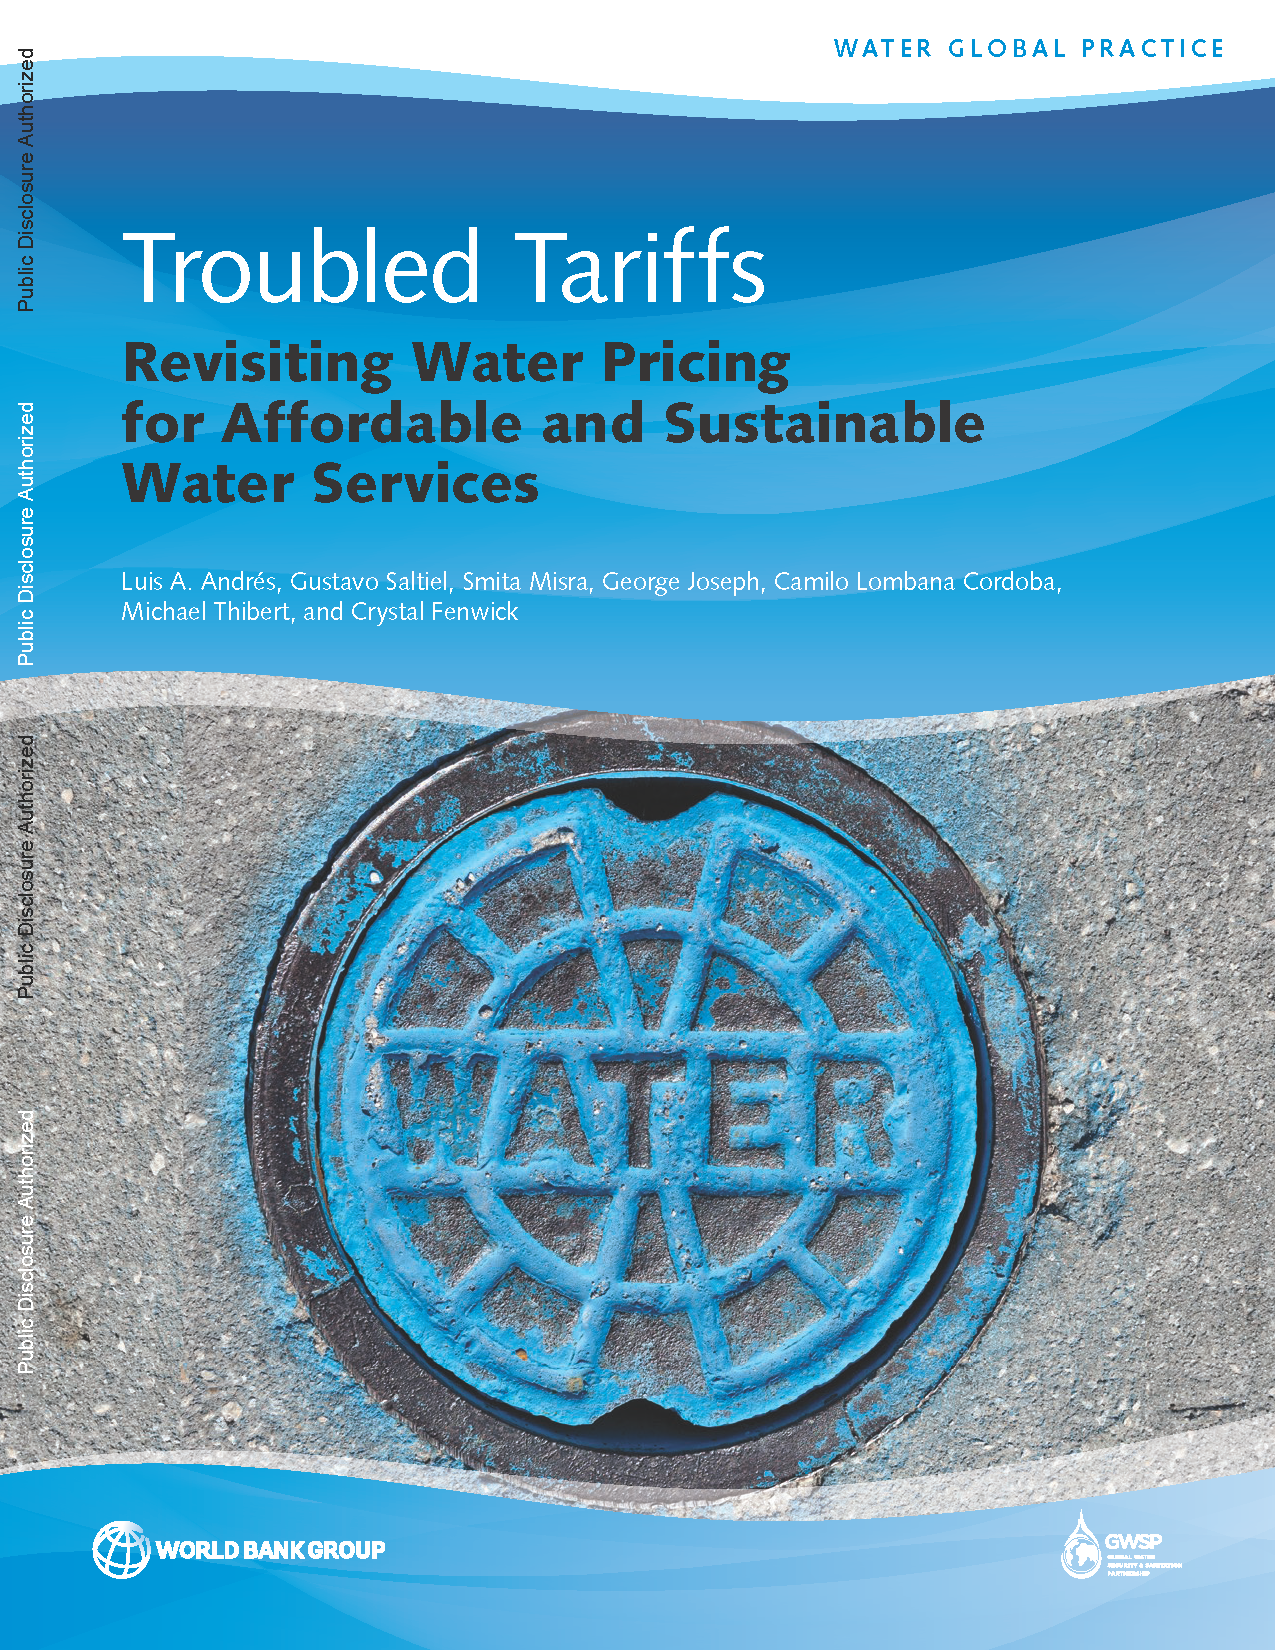 Cover page for Troubled Tariffs: Revisiting Water Pricing for Affordable and Sustainable Water Services